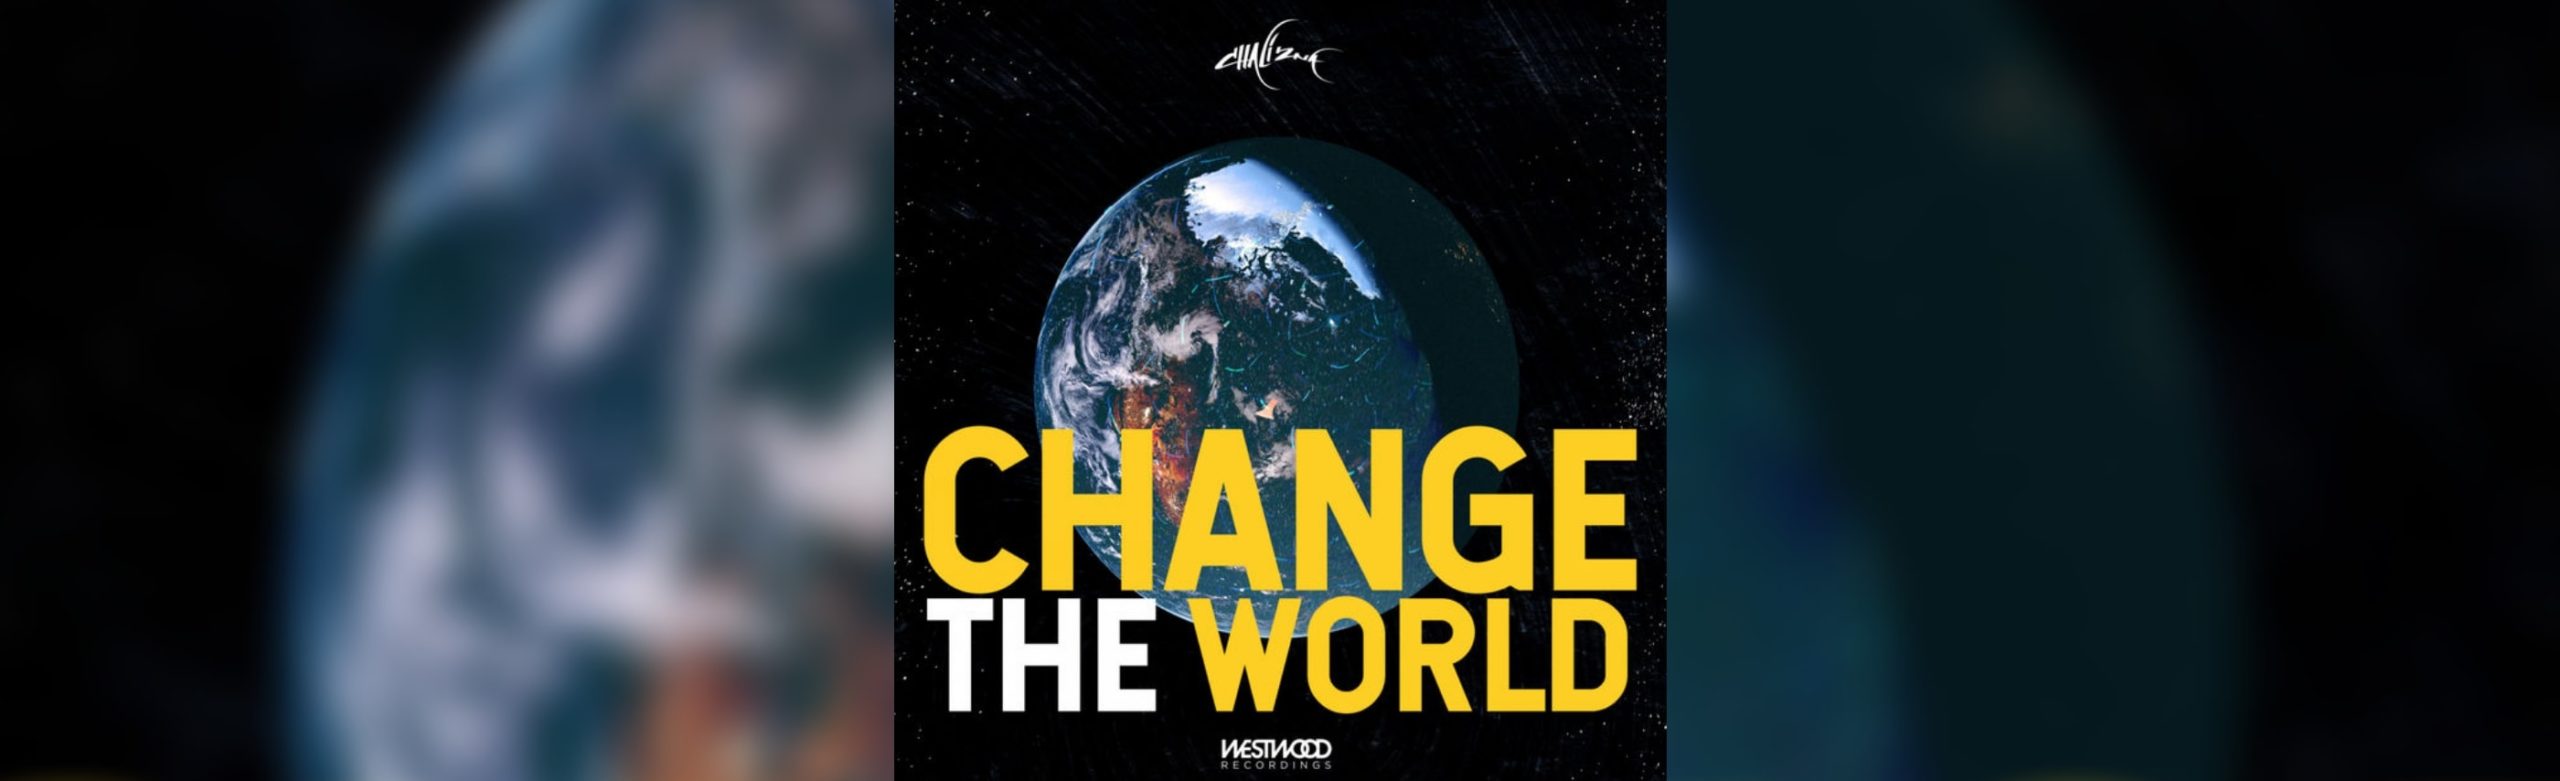 LISTEN: Chali 2na Drops Unexpected New Single “Change the World” Image